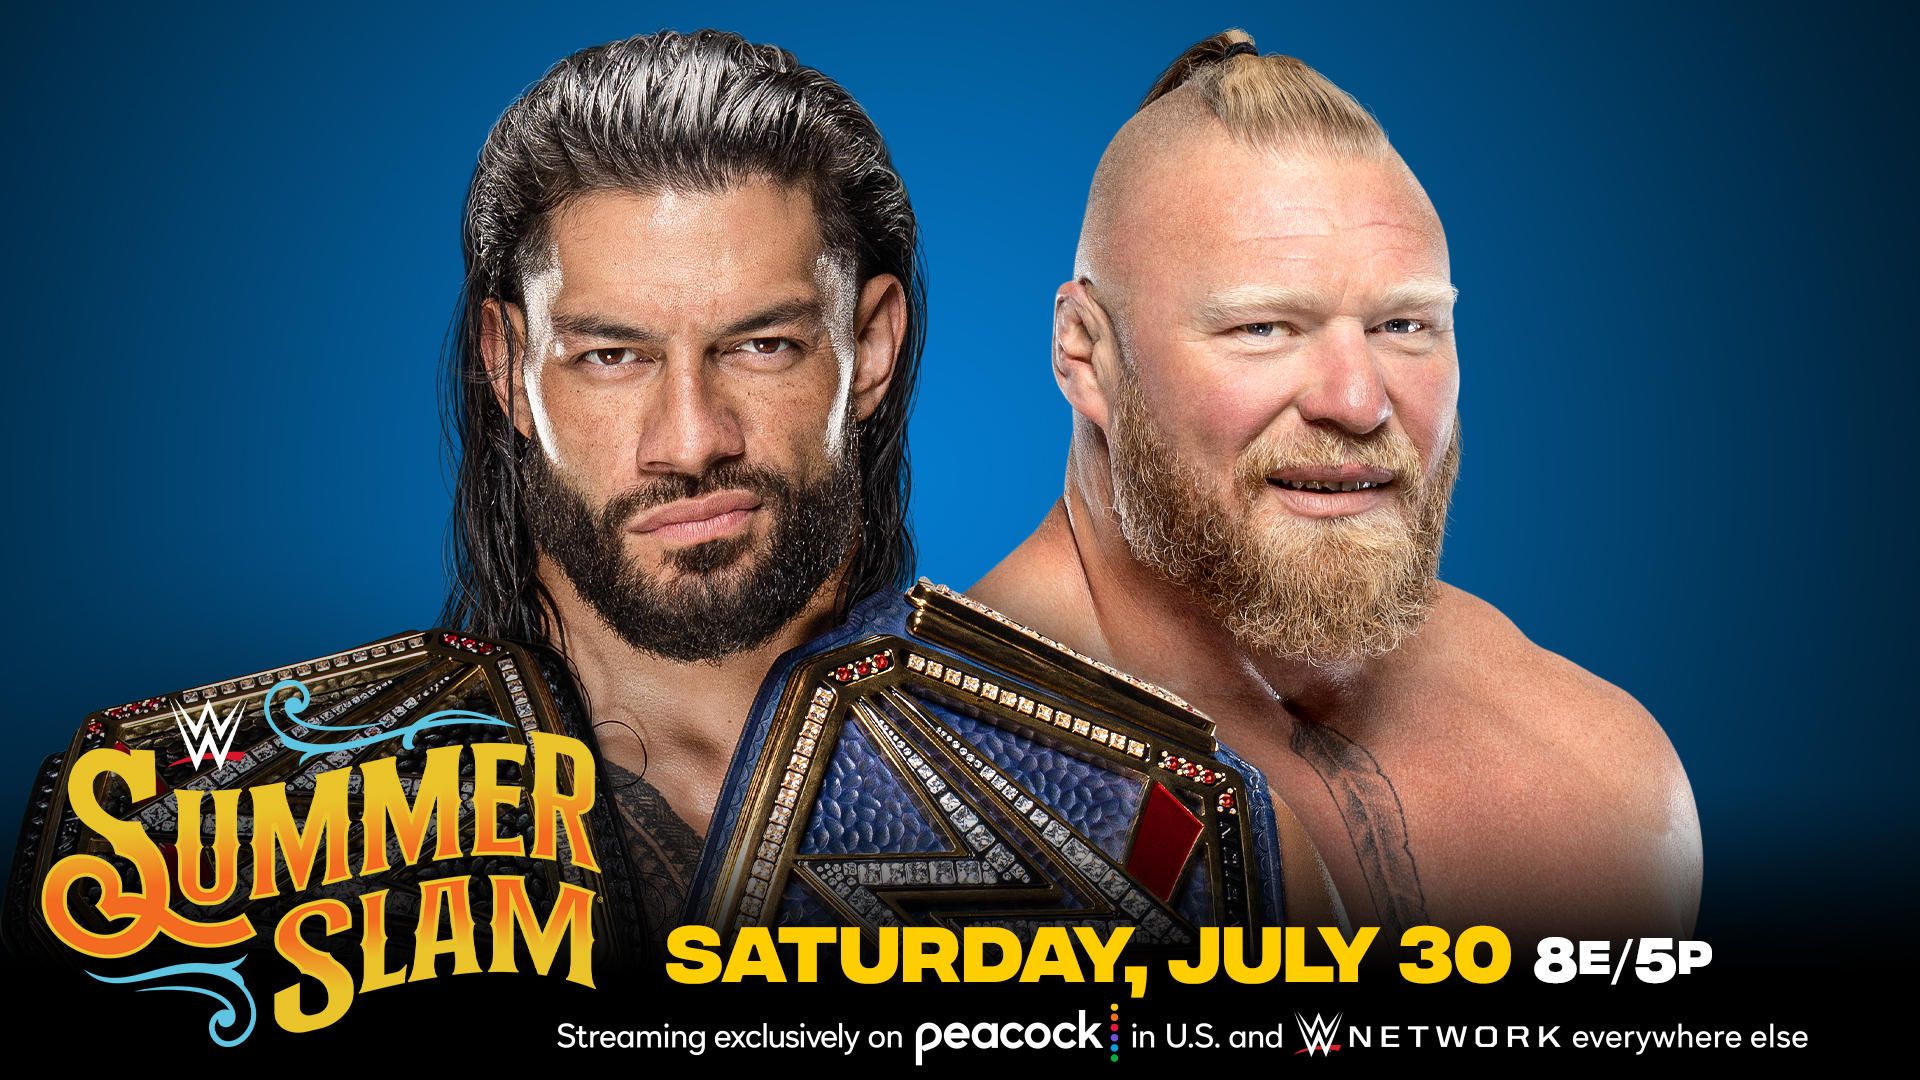 SummerSlam 2022 Assembly Would possibly Not Be The Final Roman Reigns vs. Brock Lesnar Match [Report]